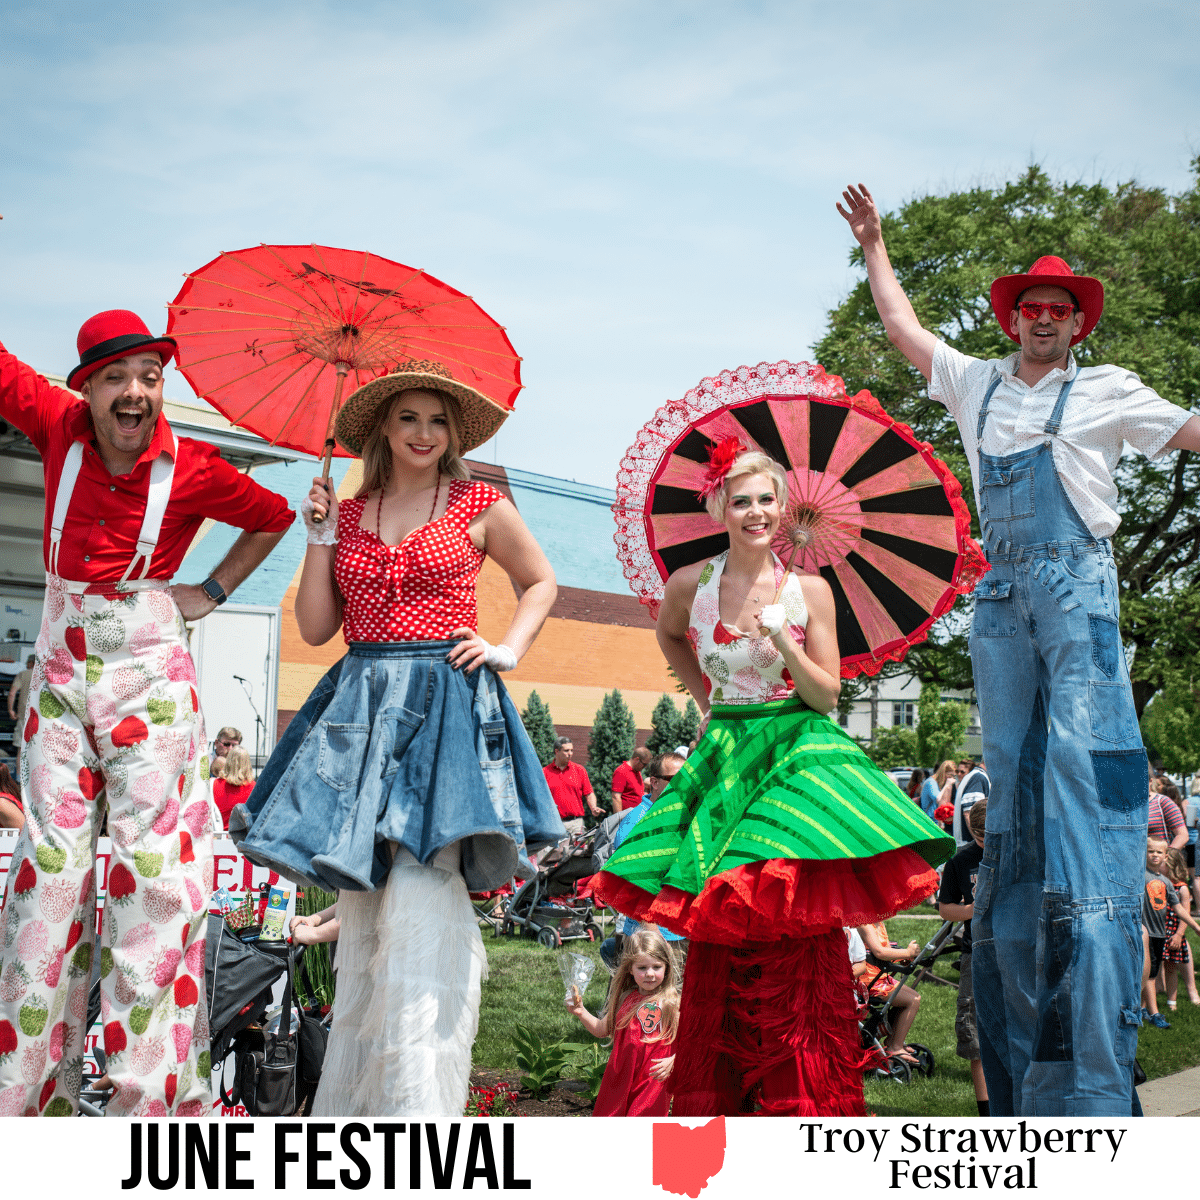 A square image of a photo of two men and two women dressed in strawberry-themed clothing, on stilts. The women are holding parasols. A white strip across the bottom has text June Festival Troy Strawberry Festival.